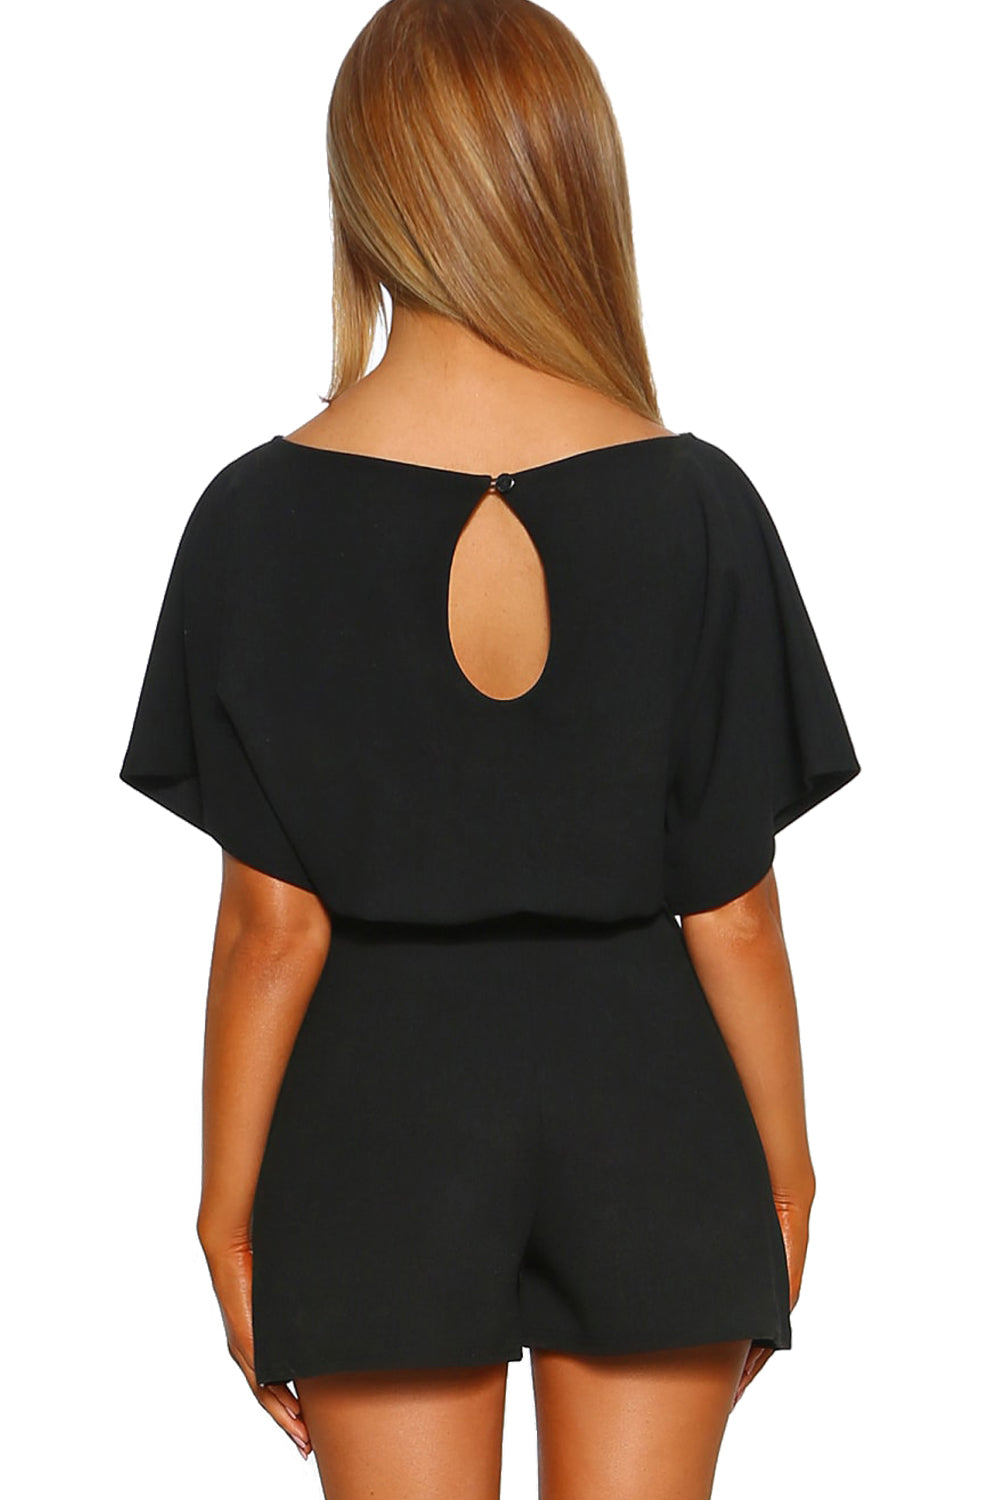 Black Over The Top Belted Playsuit